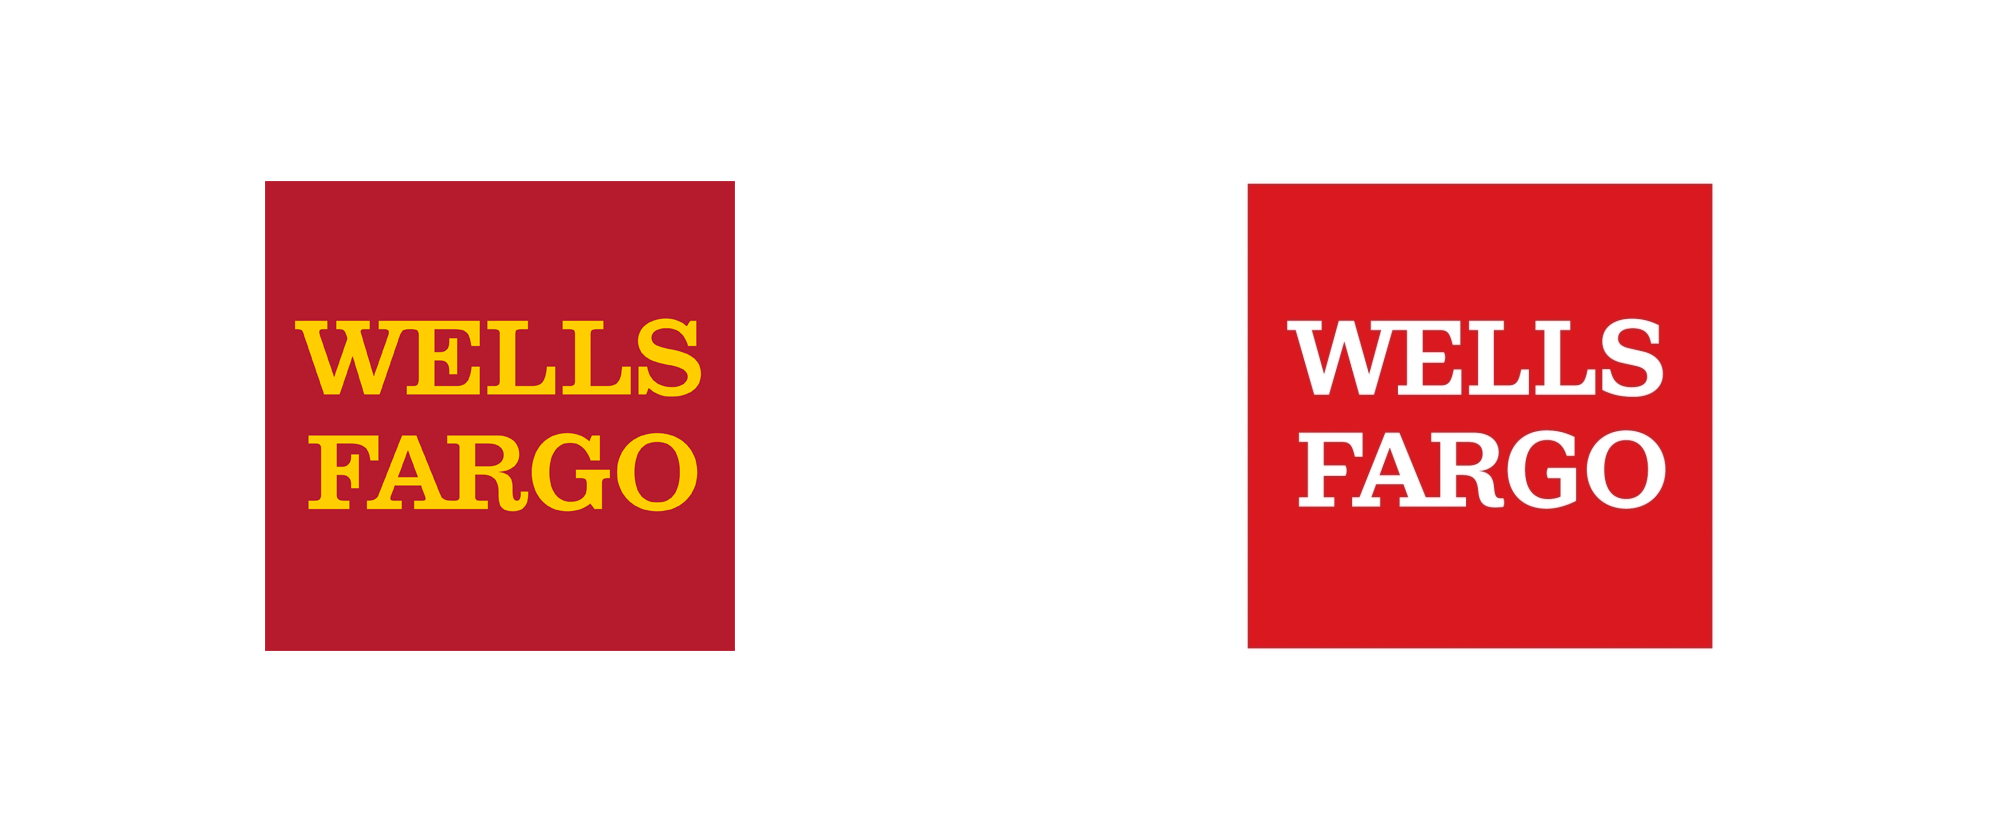 Stagecoach Logo - New Logo and Stagecoach for Wells Fargo | Branding | Payroll checks ...